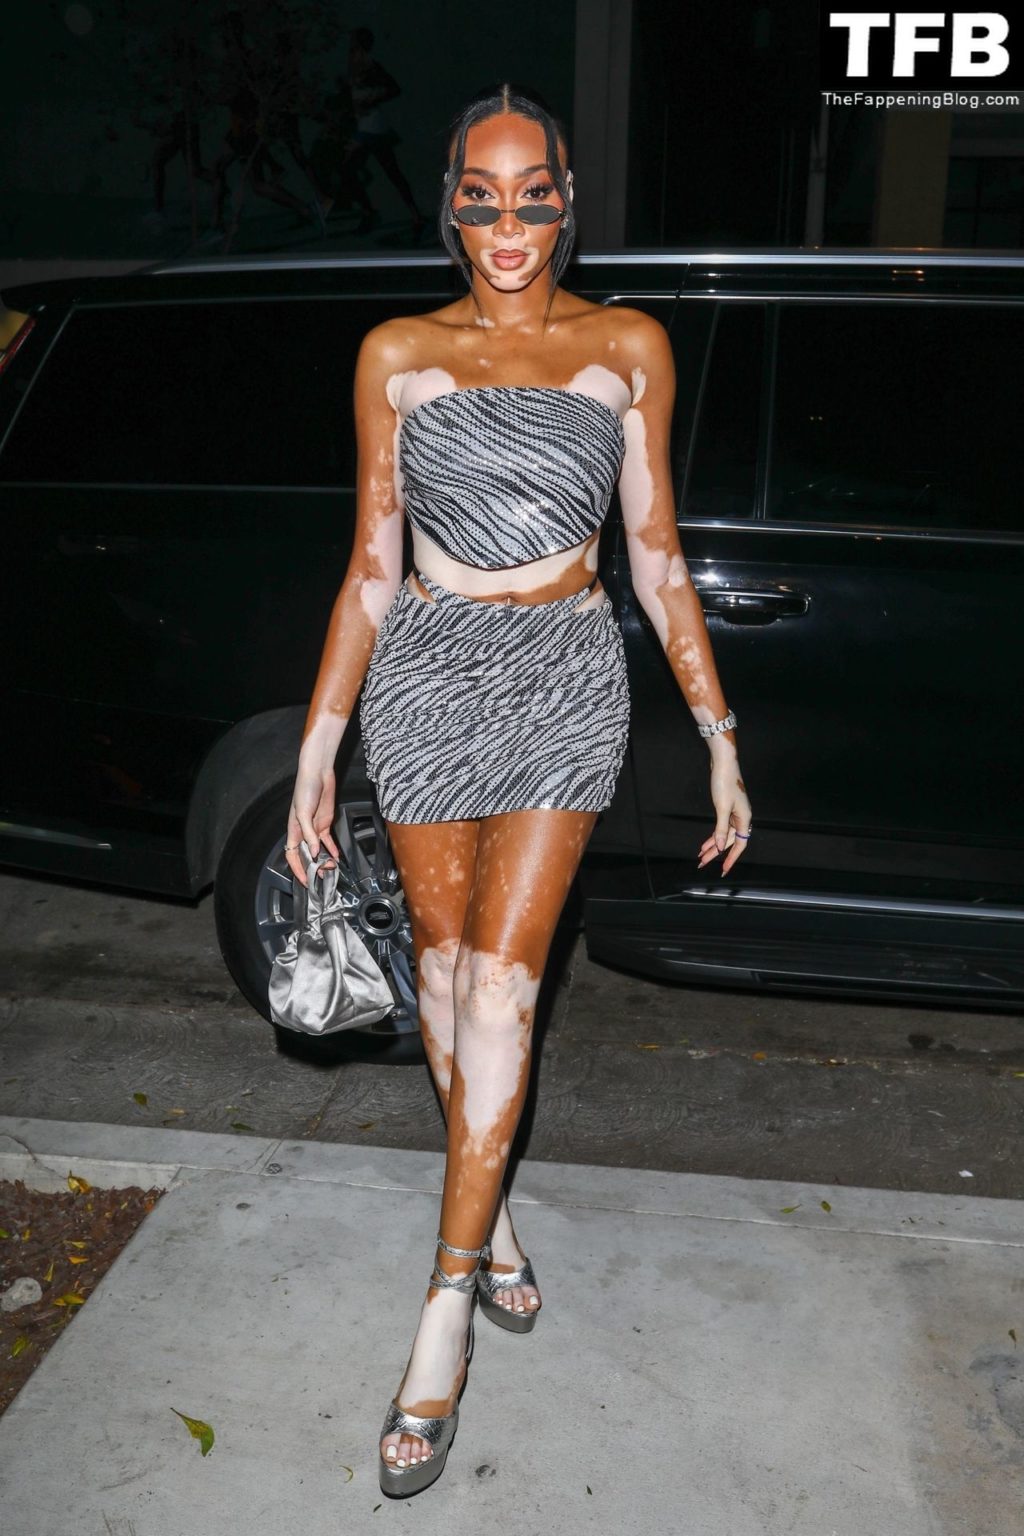 Winnie Harlow Sexy The Fappening Blog 12 1024x1536 - Winnie Harlow Arrives at the Revolve Clothing Store Event in LA (43 Photos)